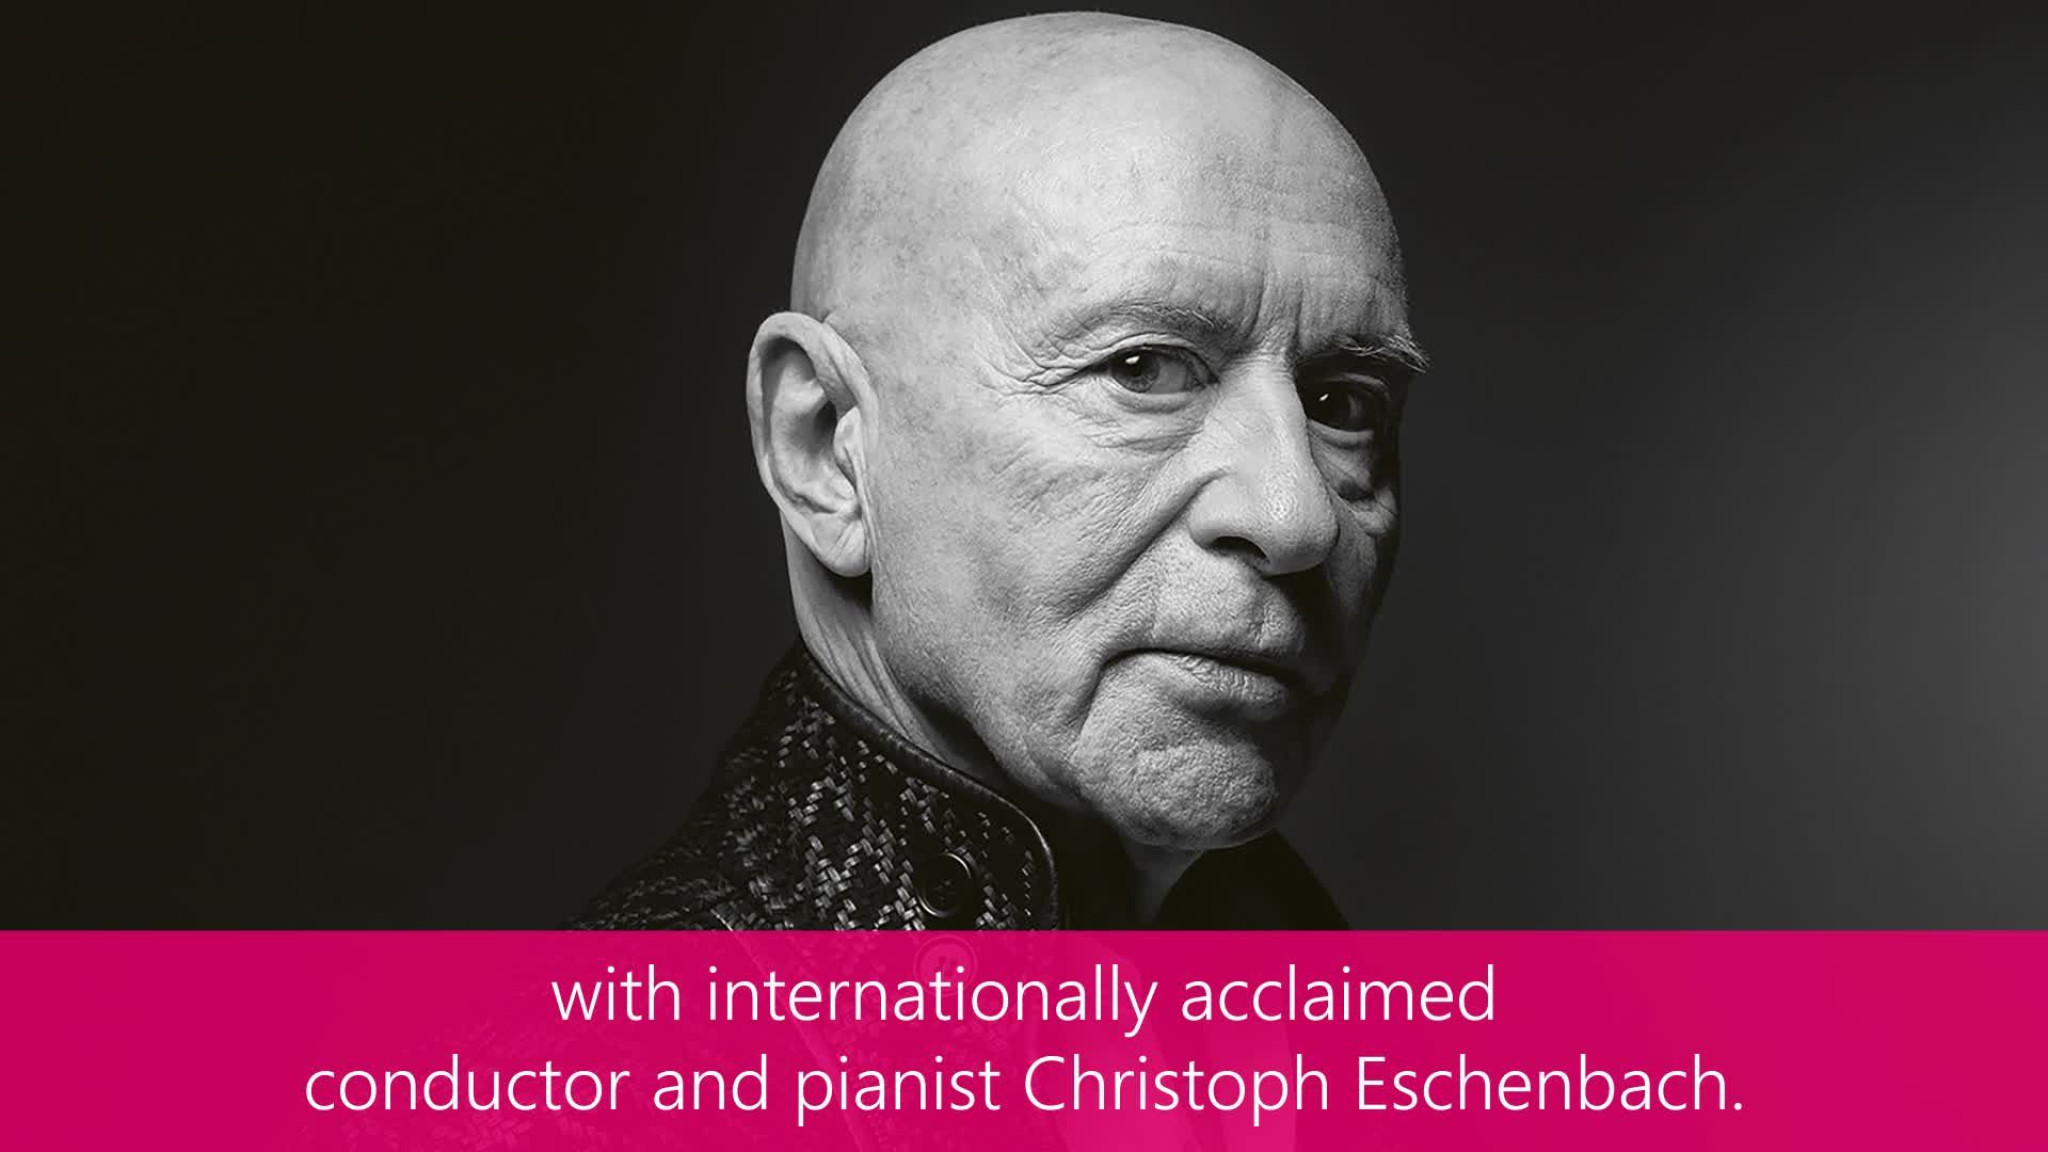 Learn piano with Christoph Eschenbach and Tomplay